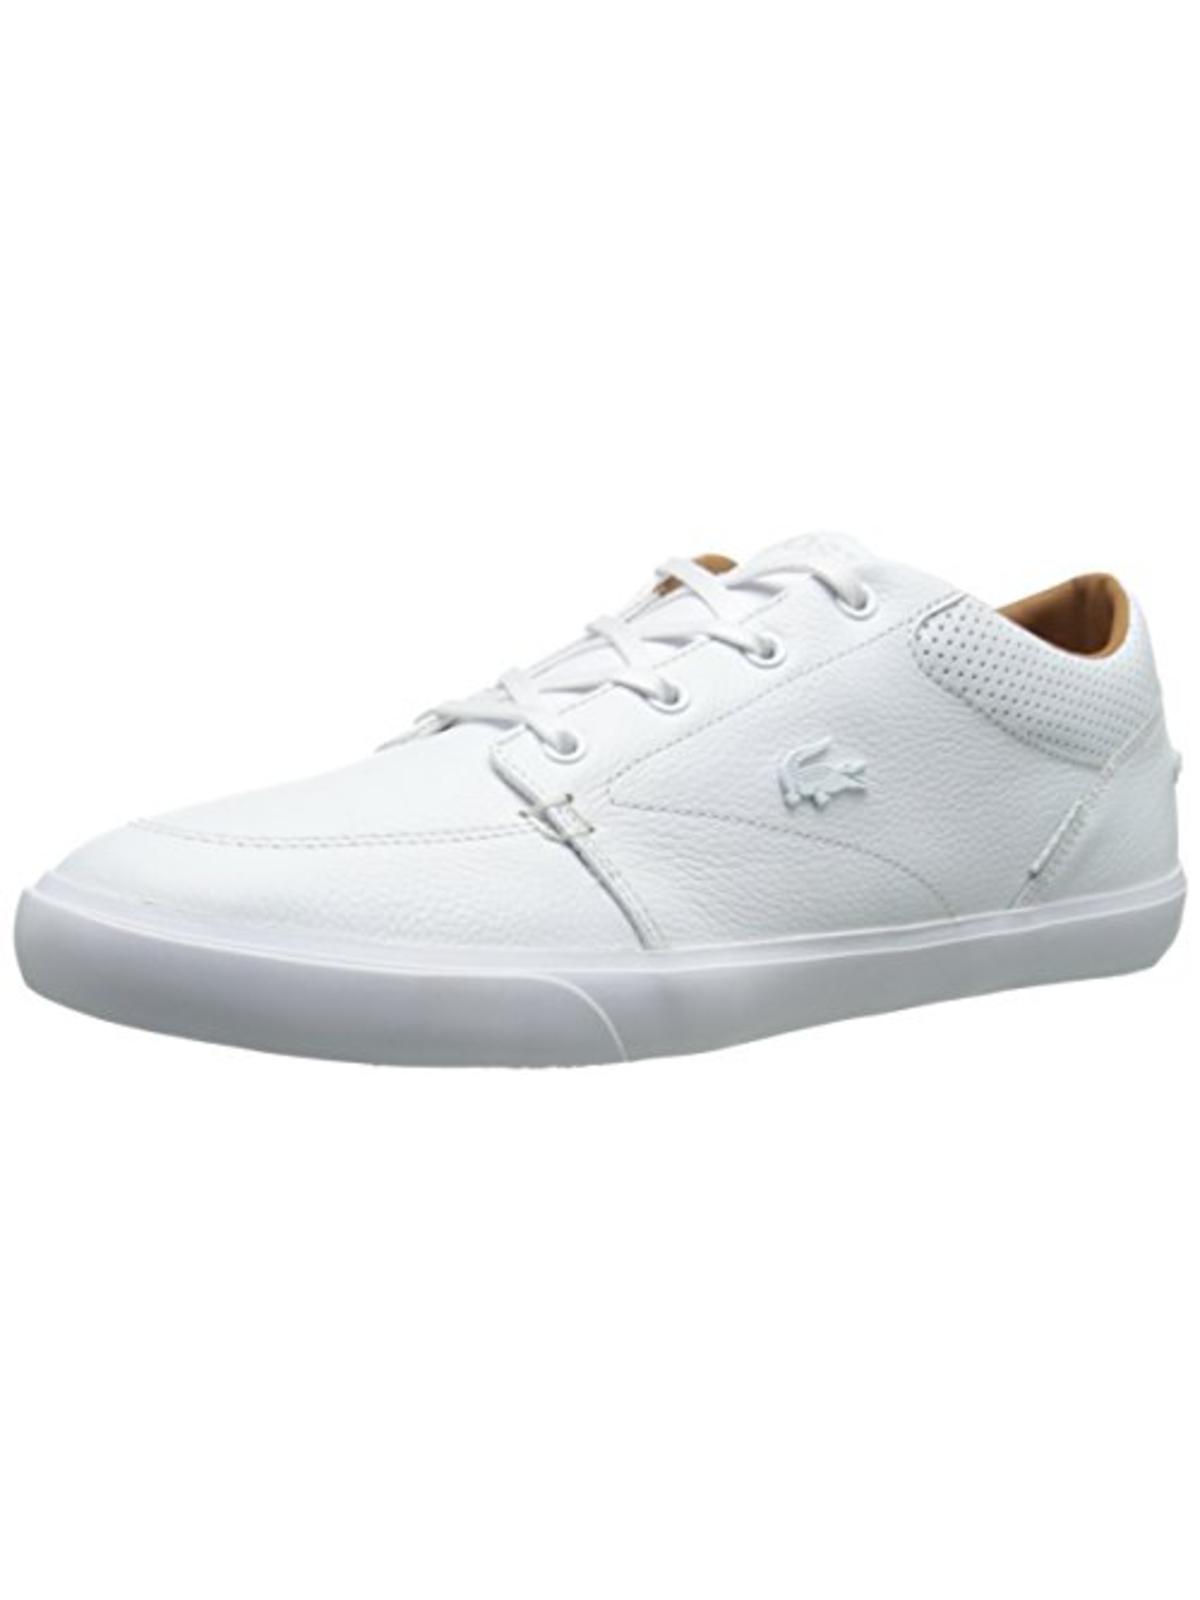 Lacoste Bayliss Mens Faux Leather Lace Up Casual Shoes In White